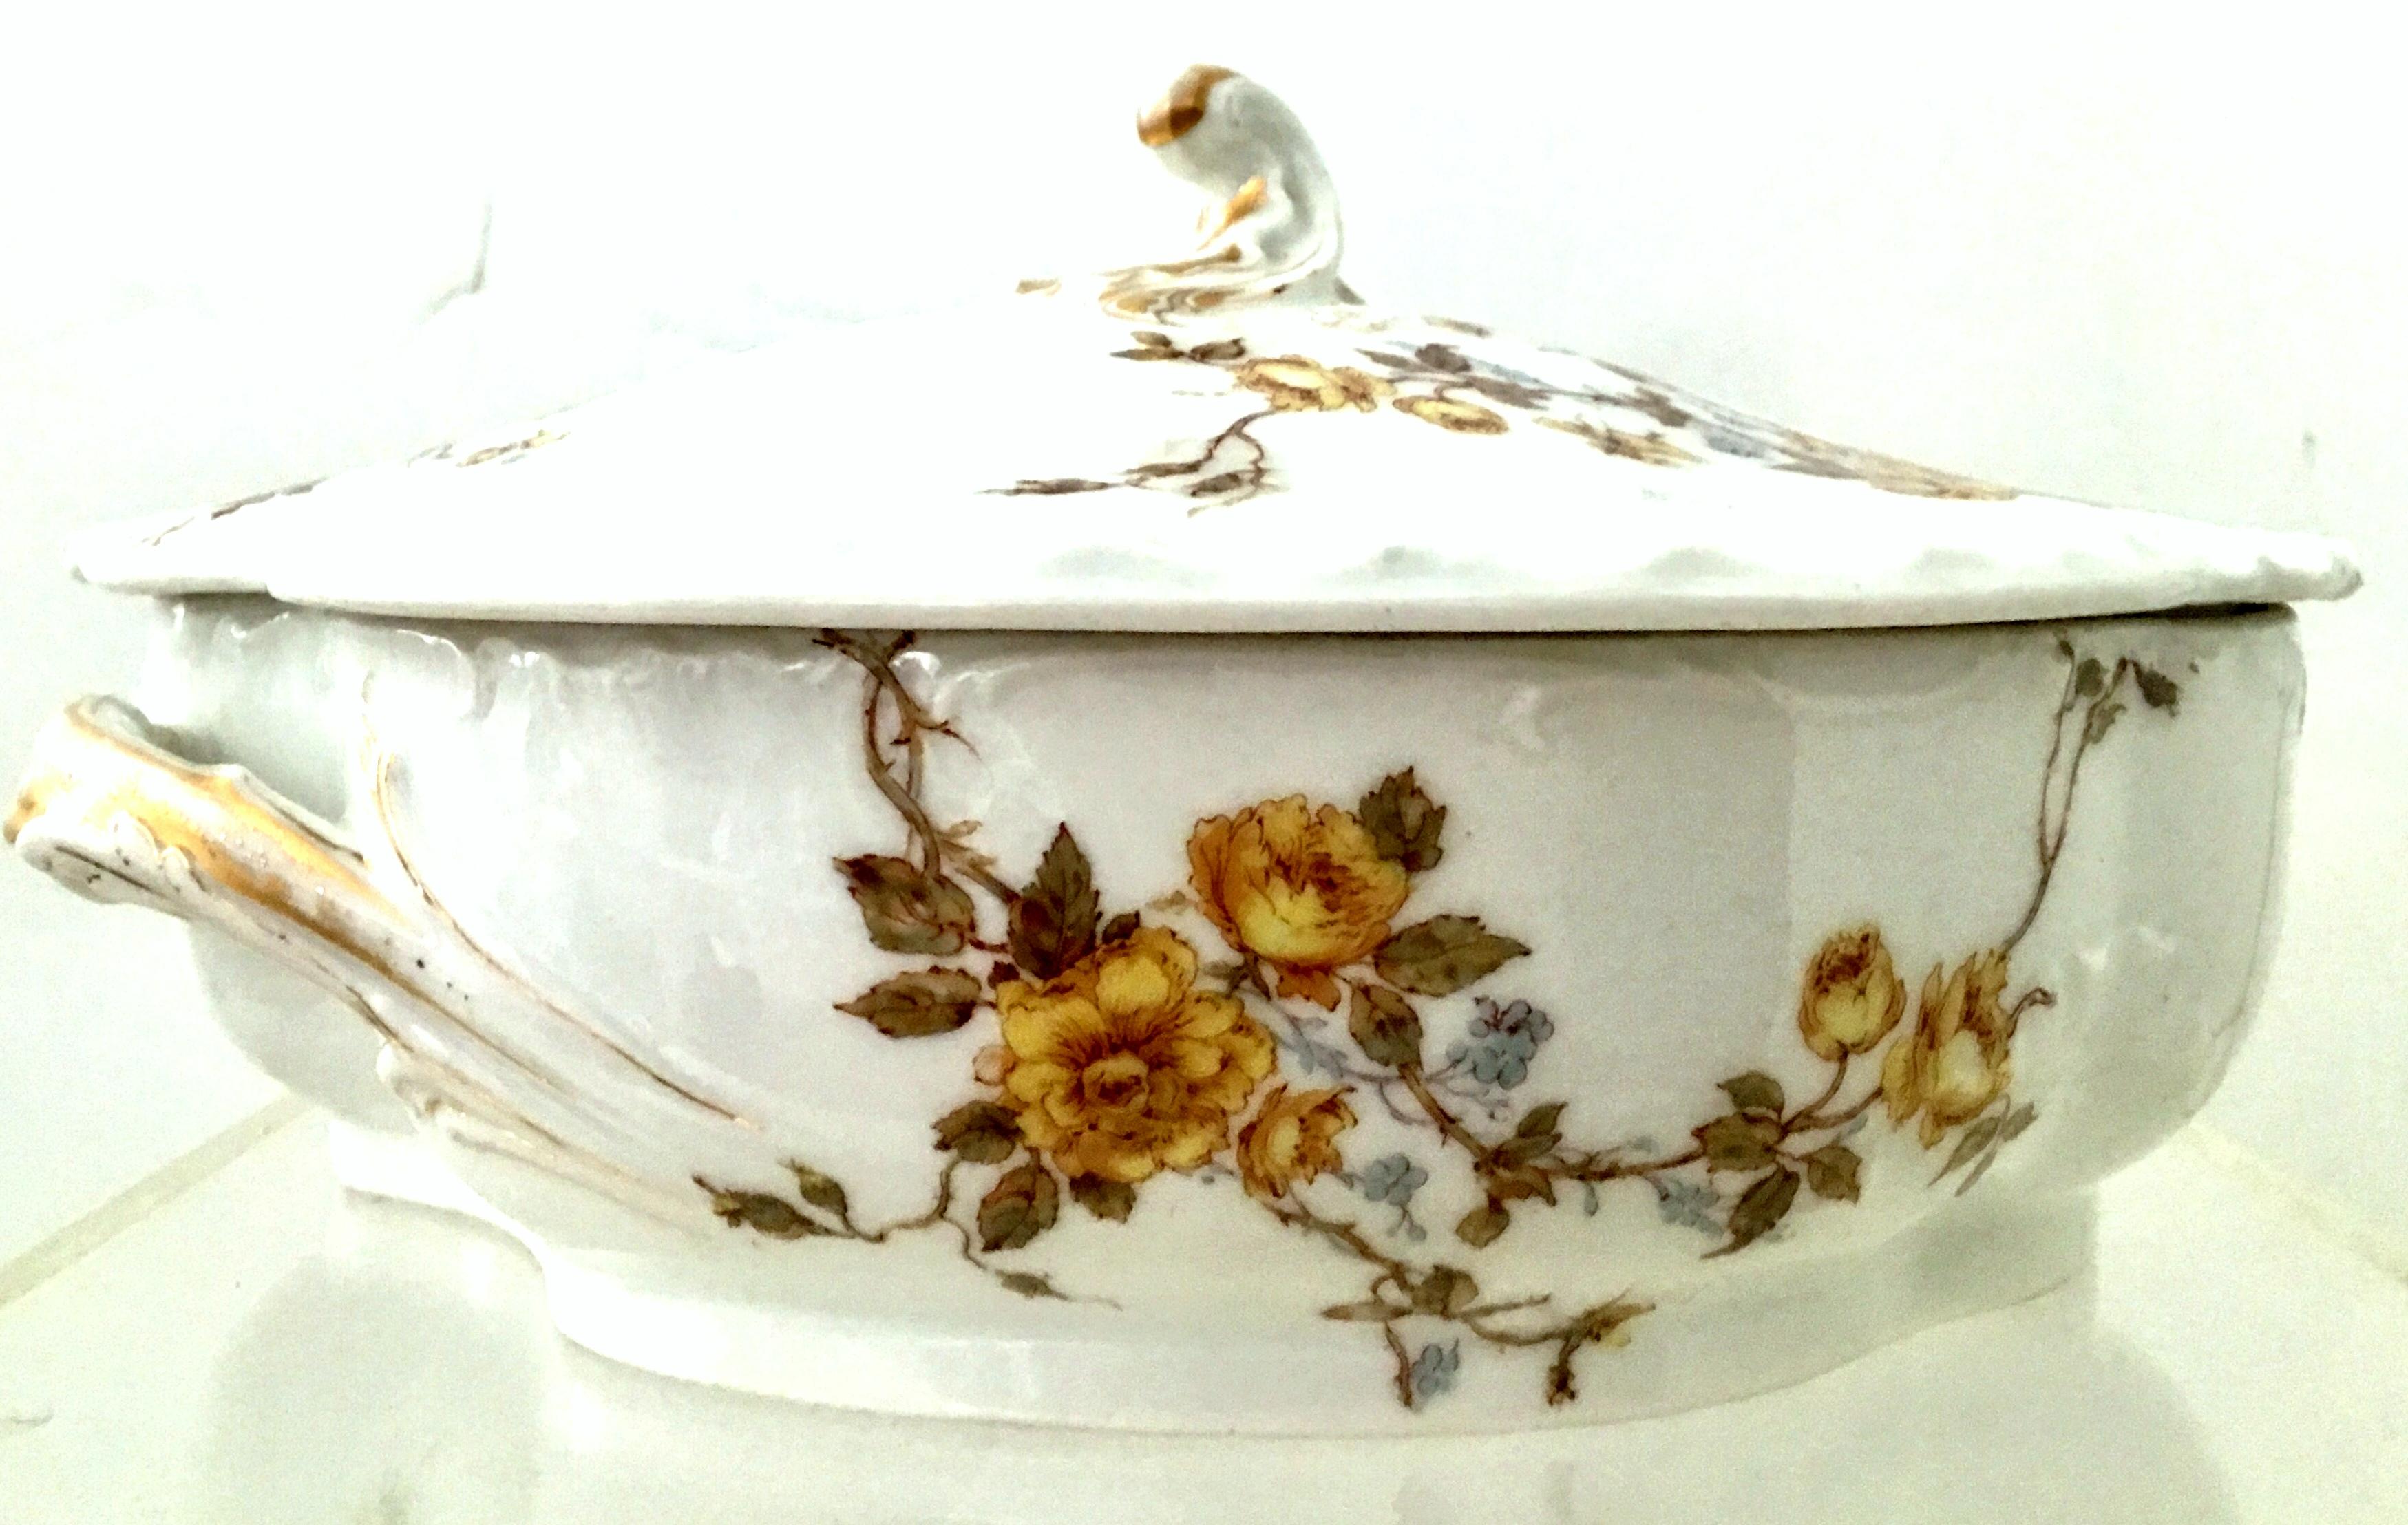 Early 20th century Limoges France lidded serving dish by Haviland & Co. This oval and oblong
lidded serving dish features a bright white ground with 22-karat gold detail and a scattered yellow with French blue rose pattern. Both the bottom and top